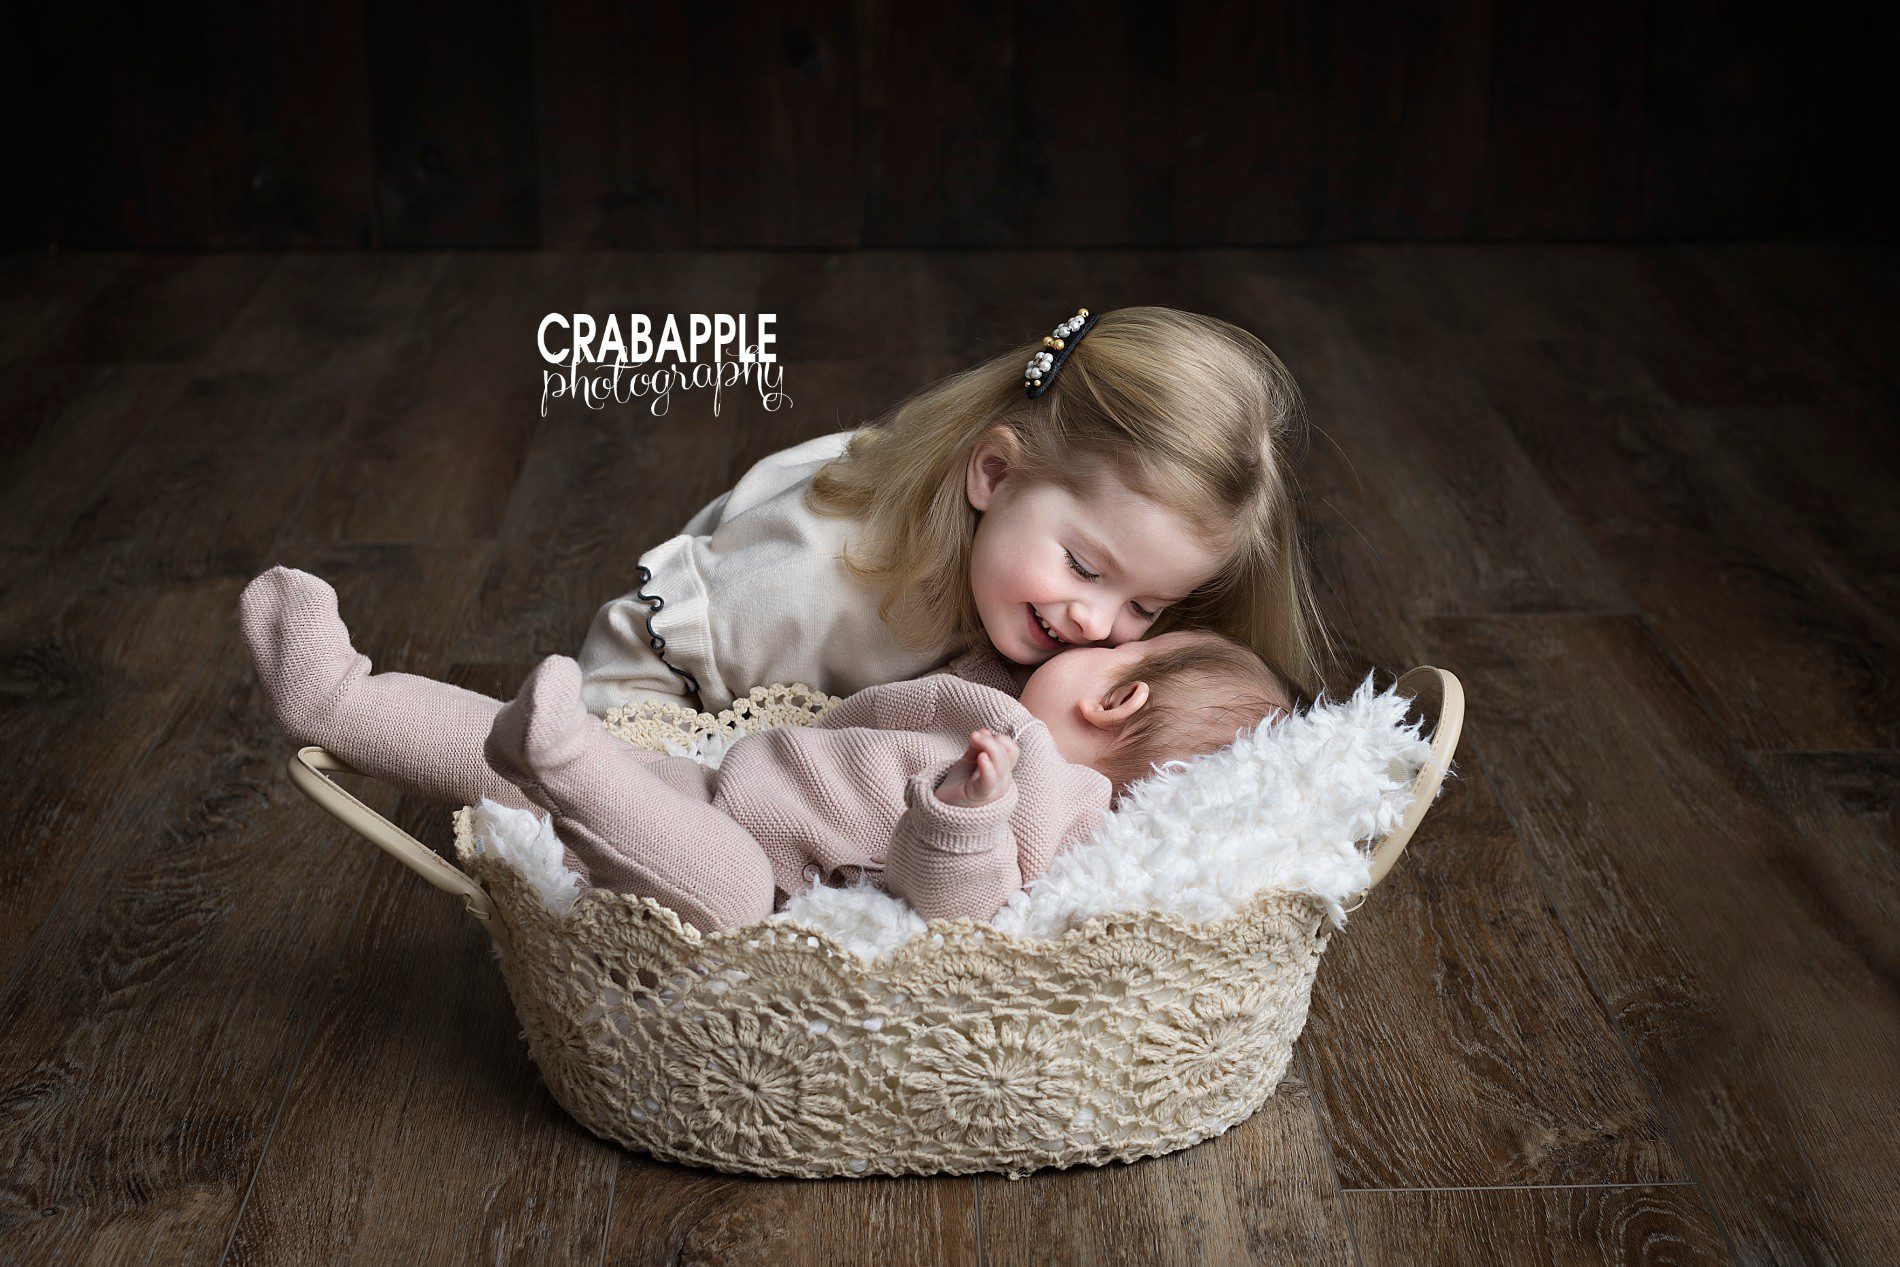 Sister photo ideas with baby and toddler